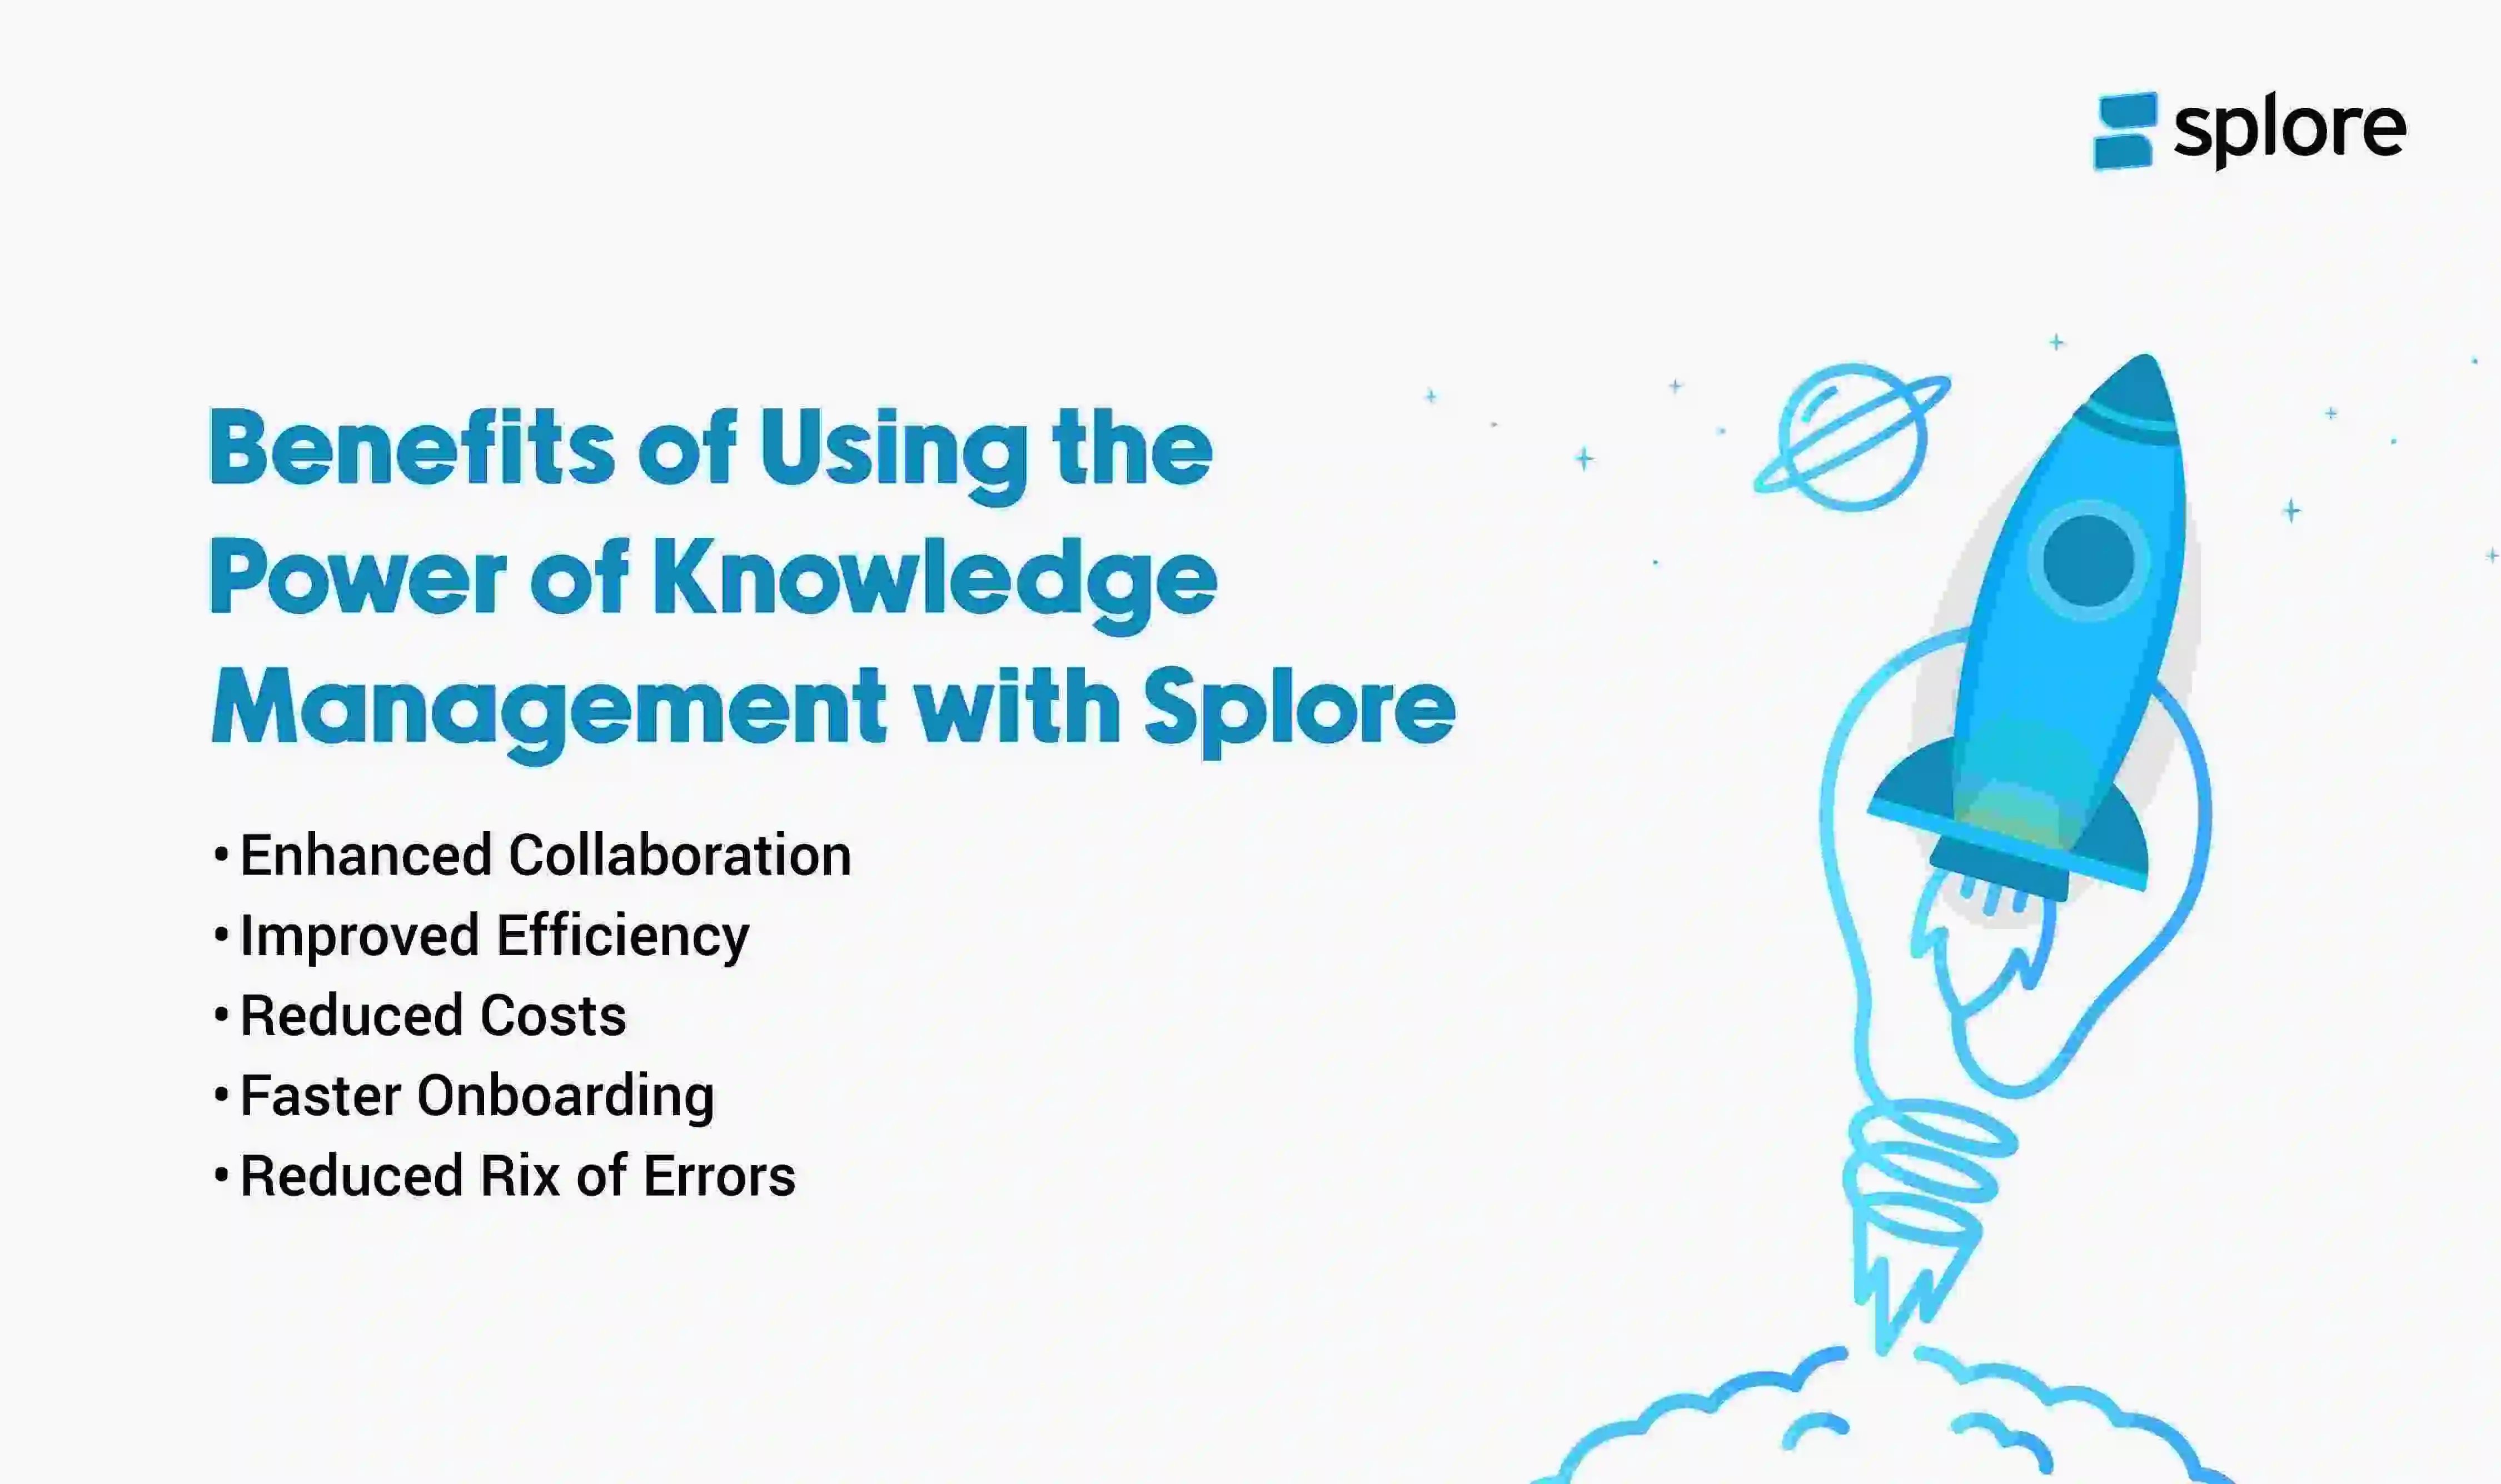 Benefits of Using the Power of Knowledge Management with Splore